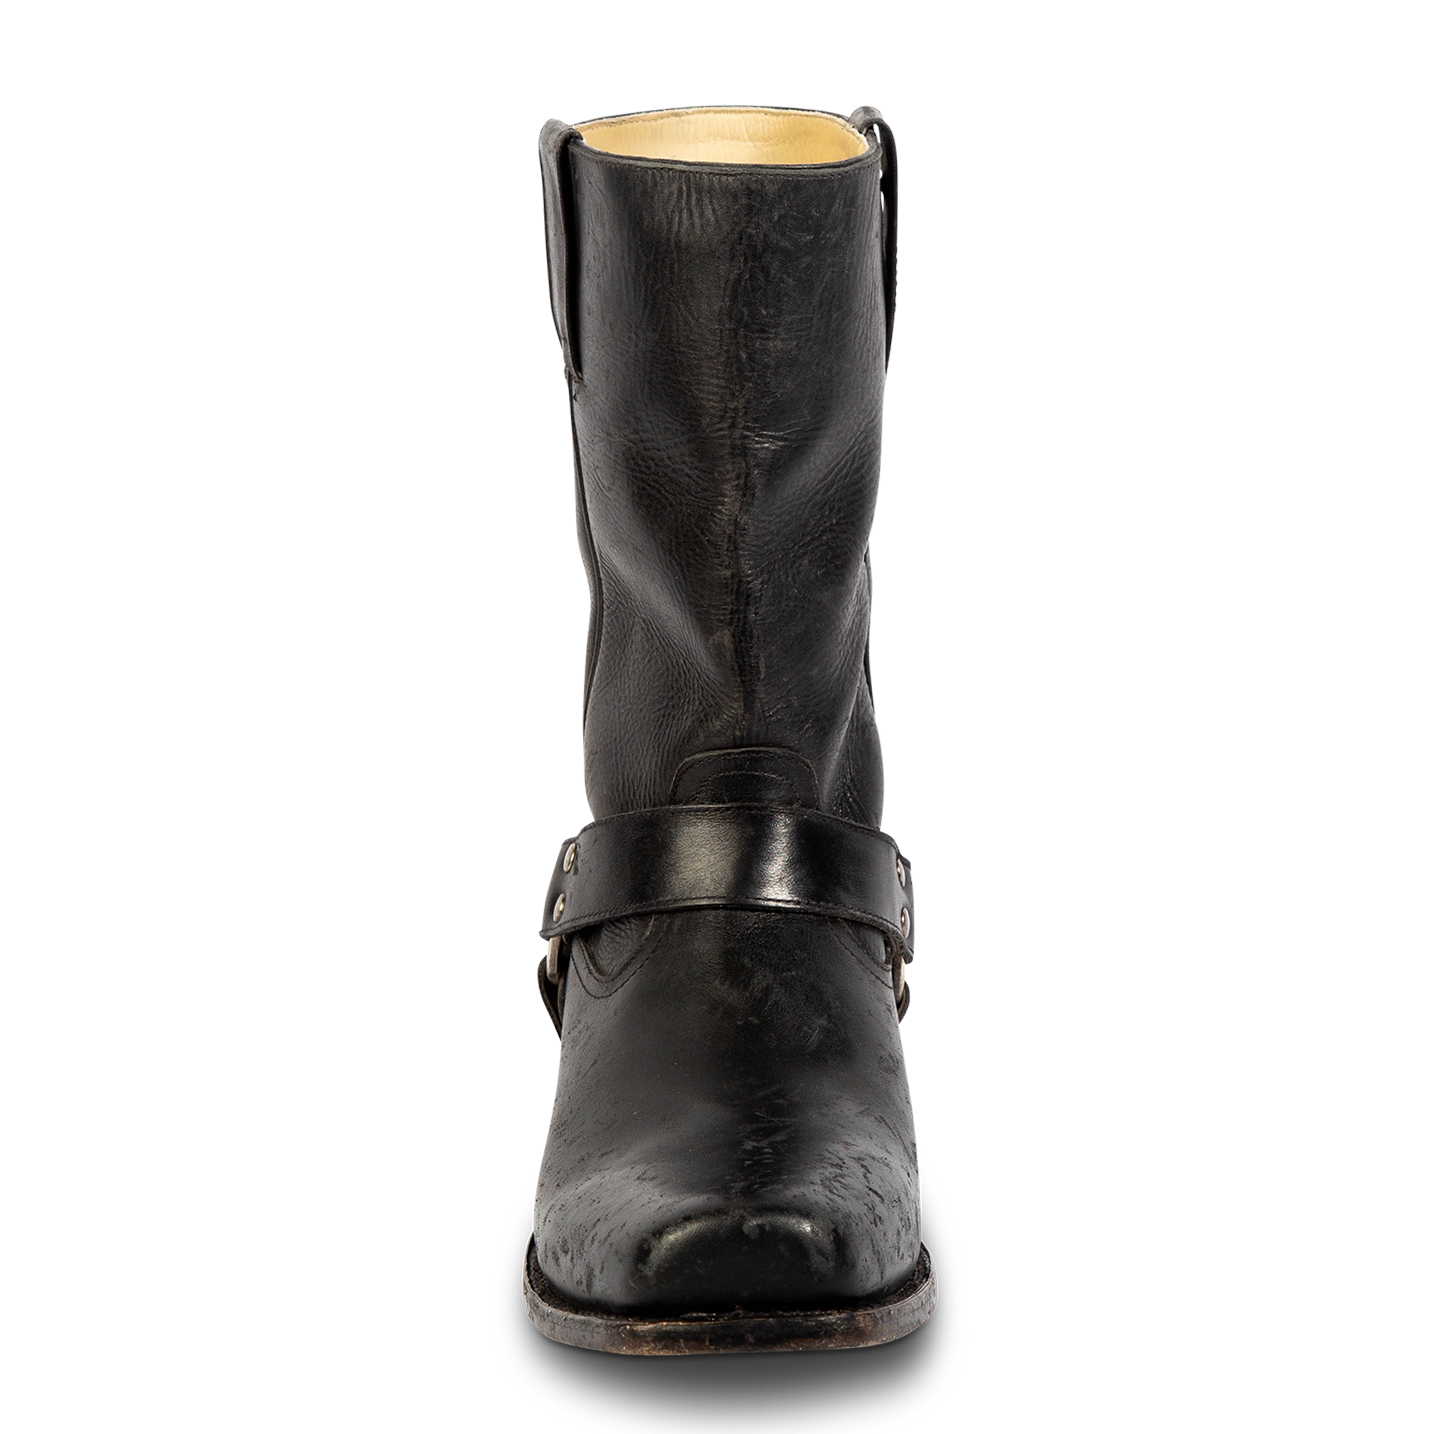 Front view showing distressed shaft and leather ankle harness on FREEBIRD men's Copperhead black boot